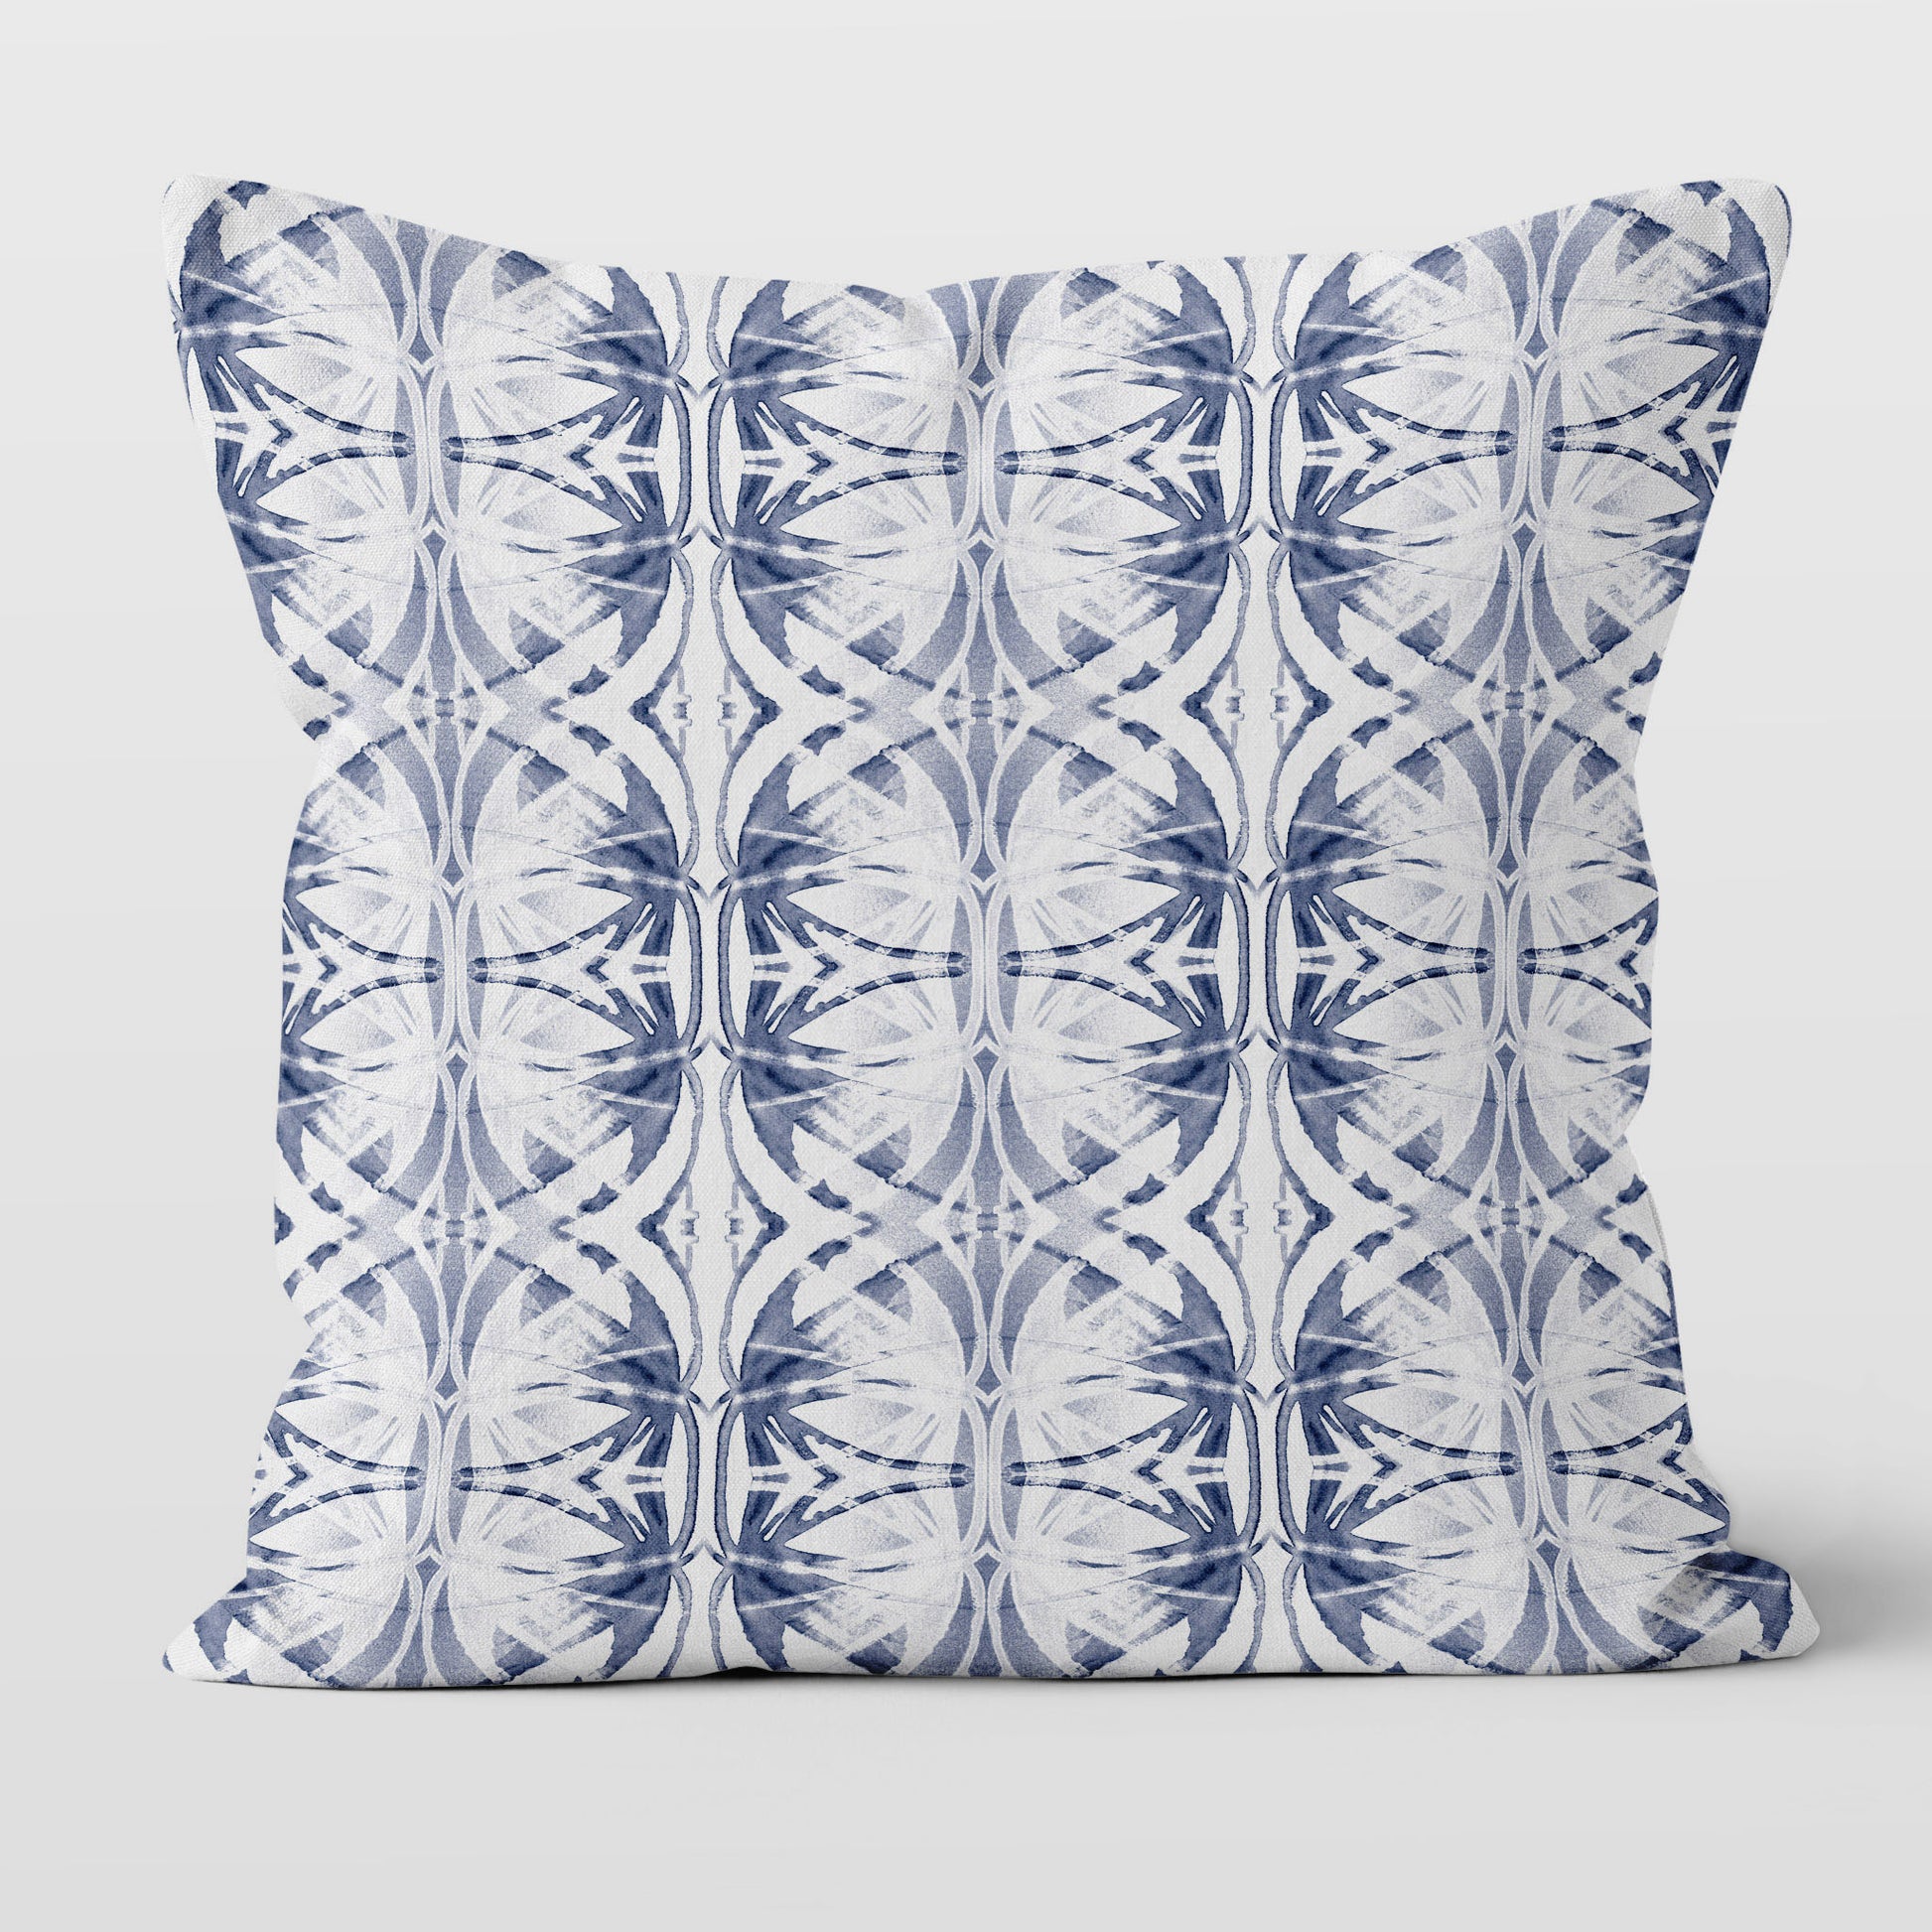 Throw pillow featuring abstract hand painted pattern in blue and white.